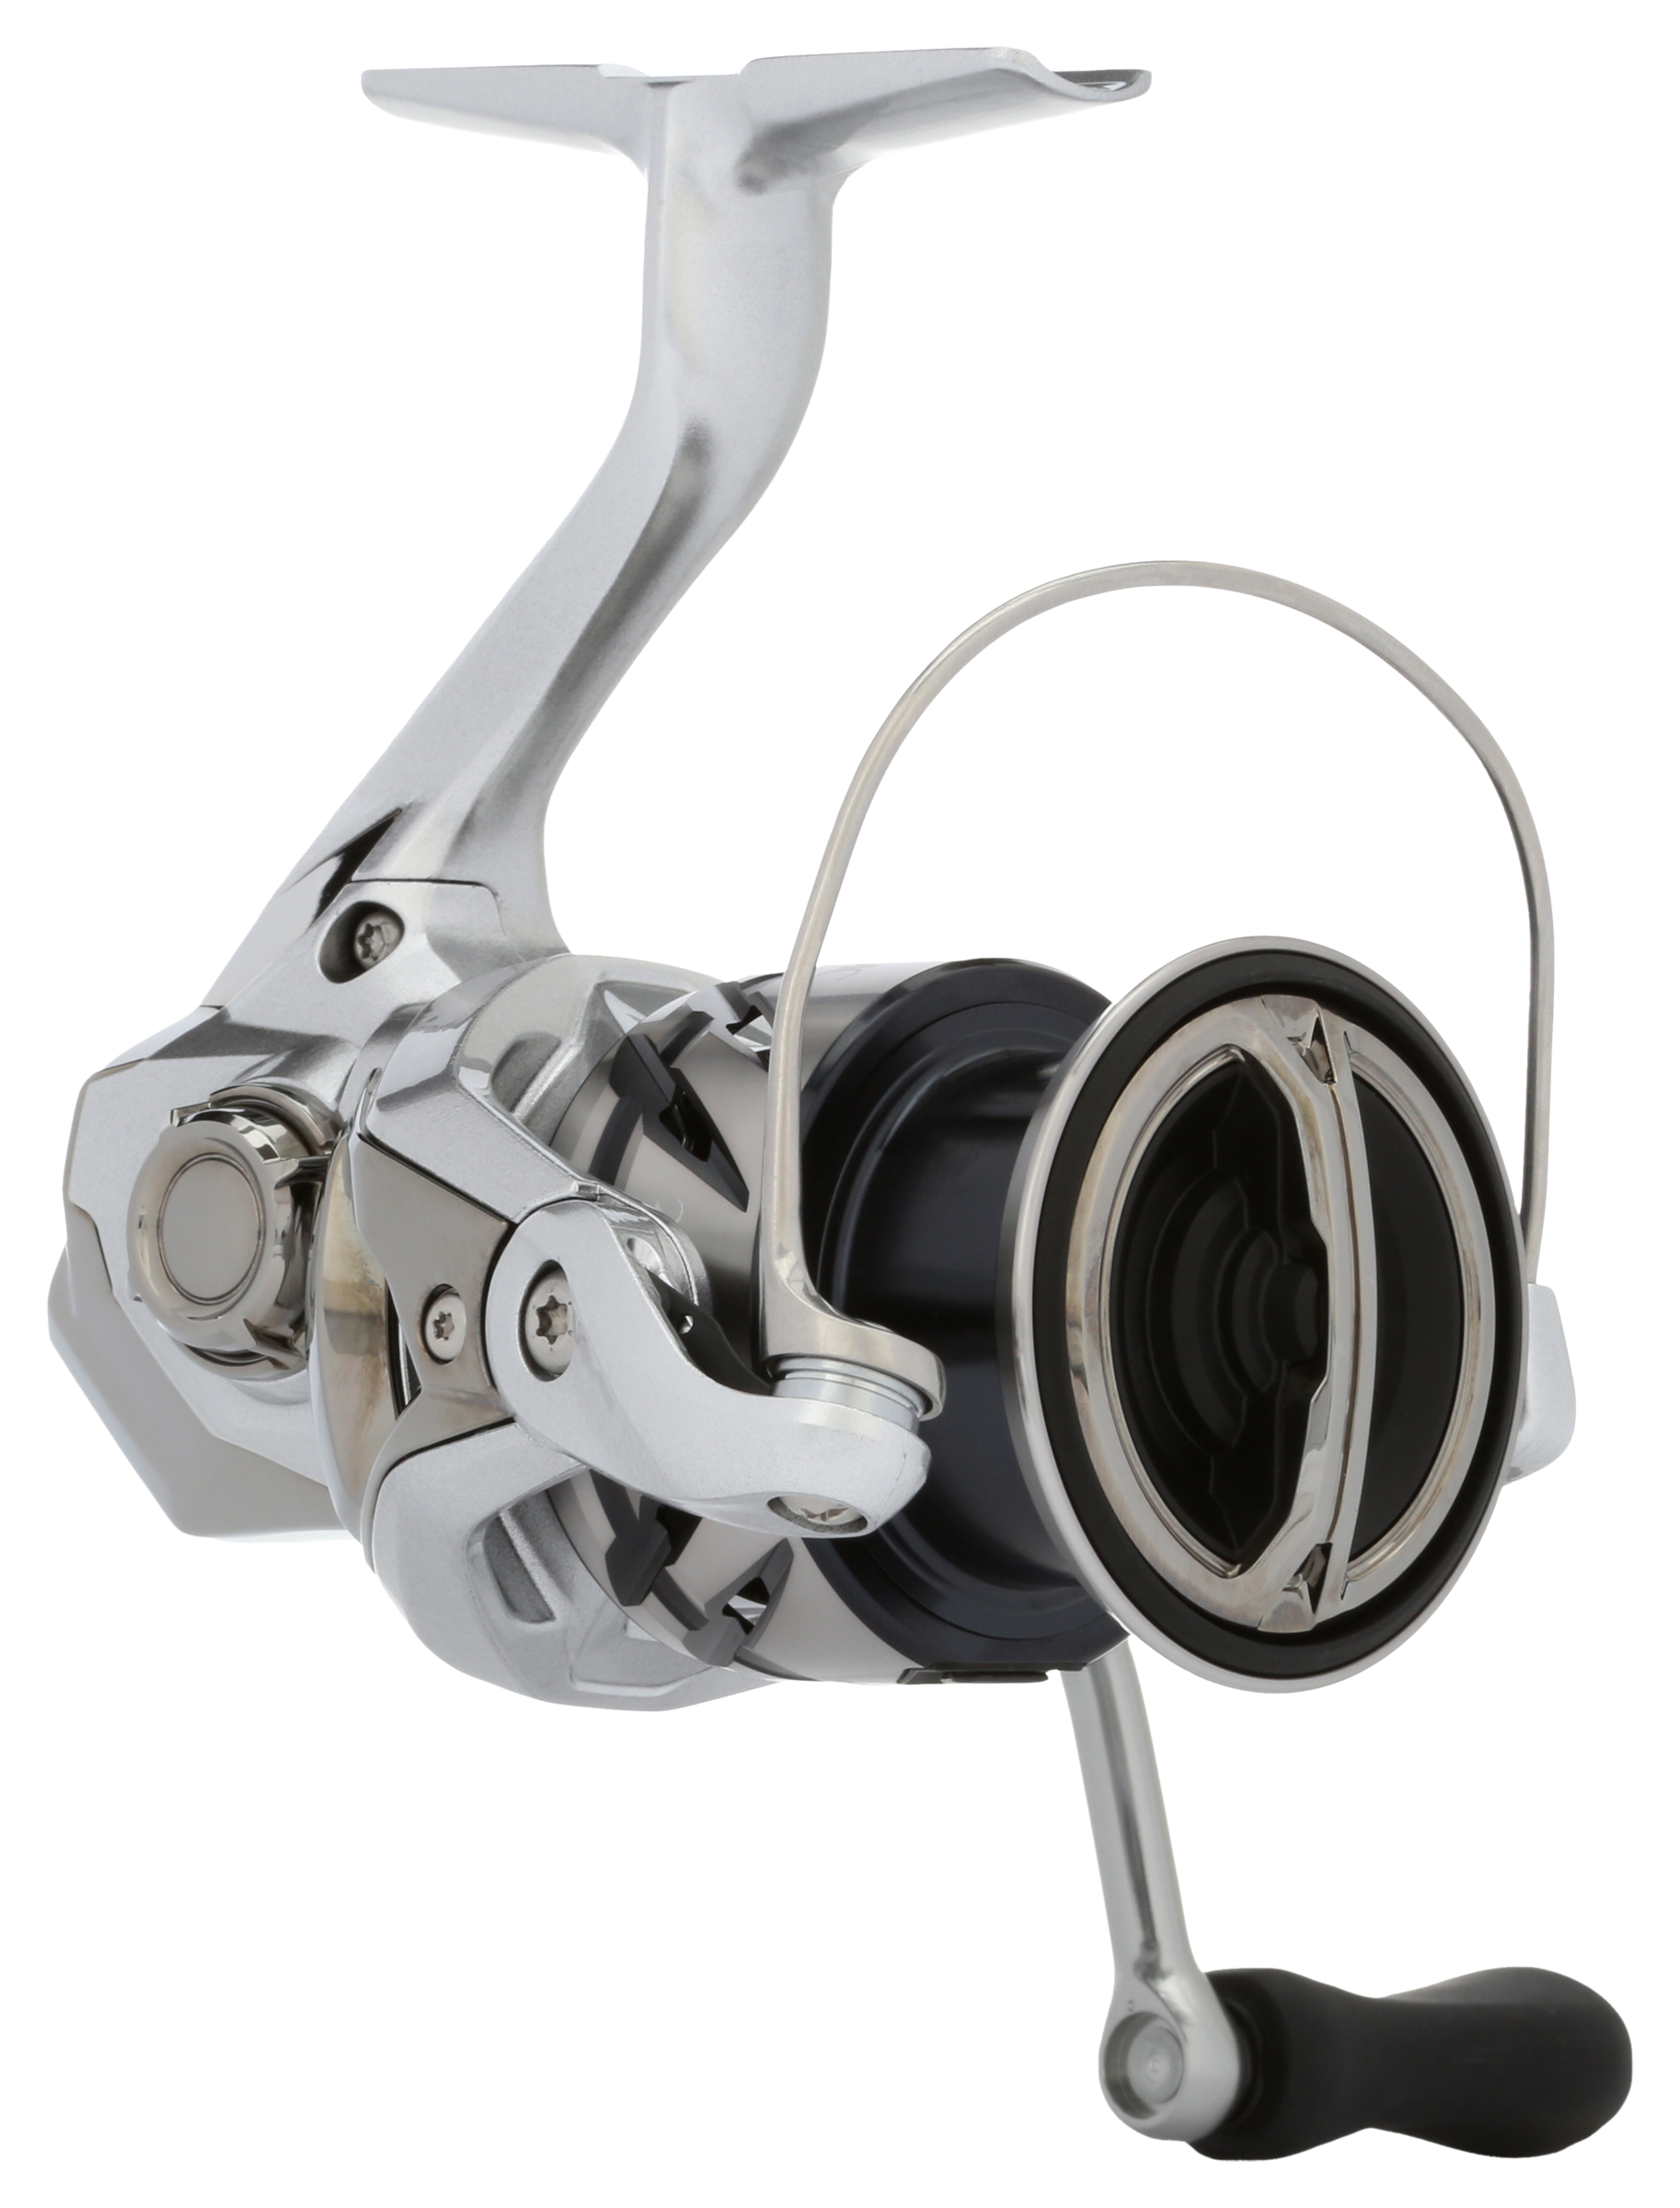 Offshore Angler Tightline spinning fishing reel TL8000 for Sale in Santa  Fe, TX - OfferUp